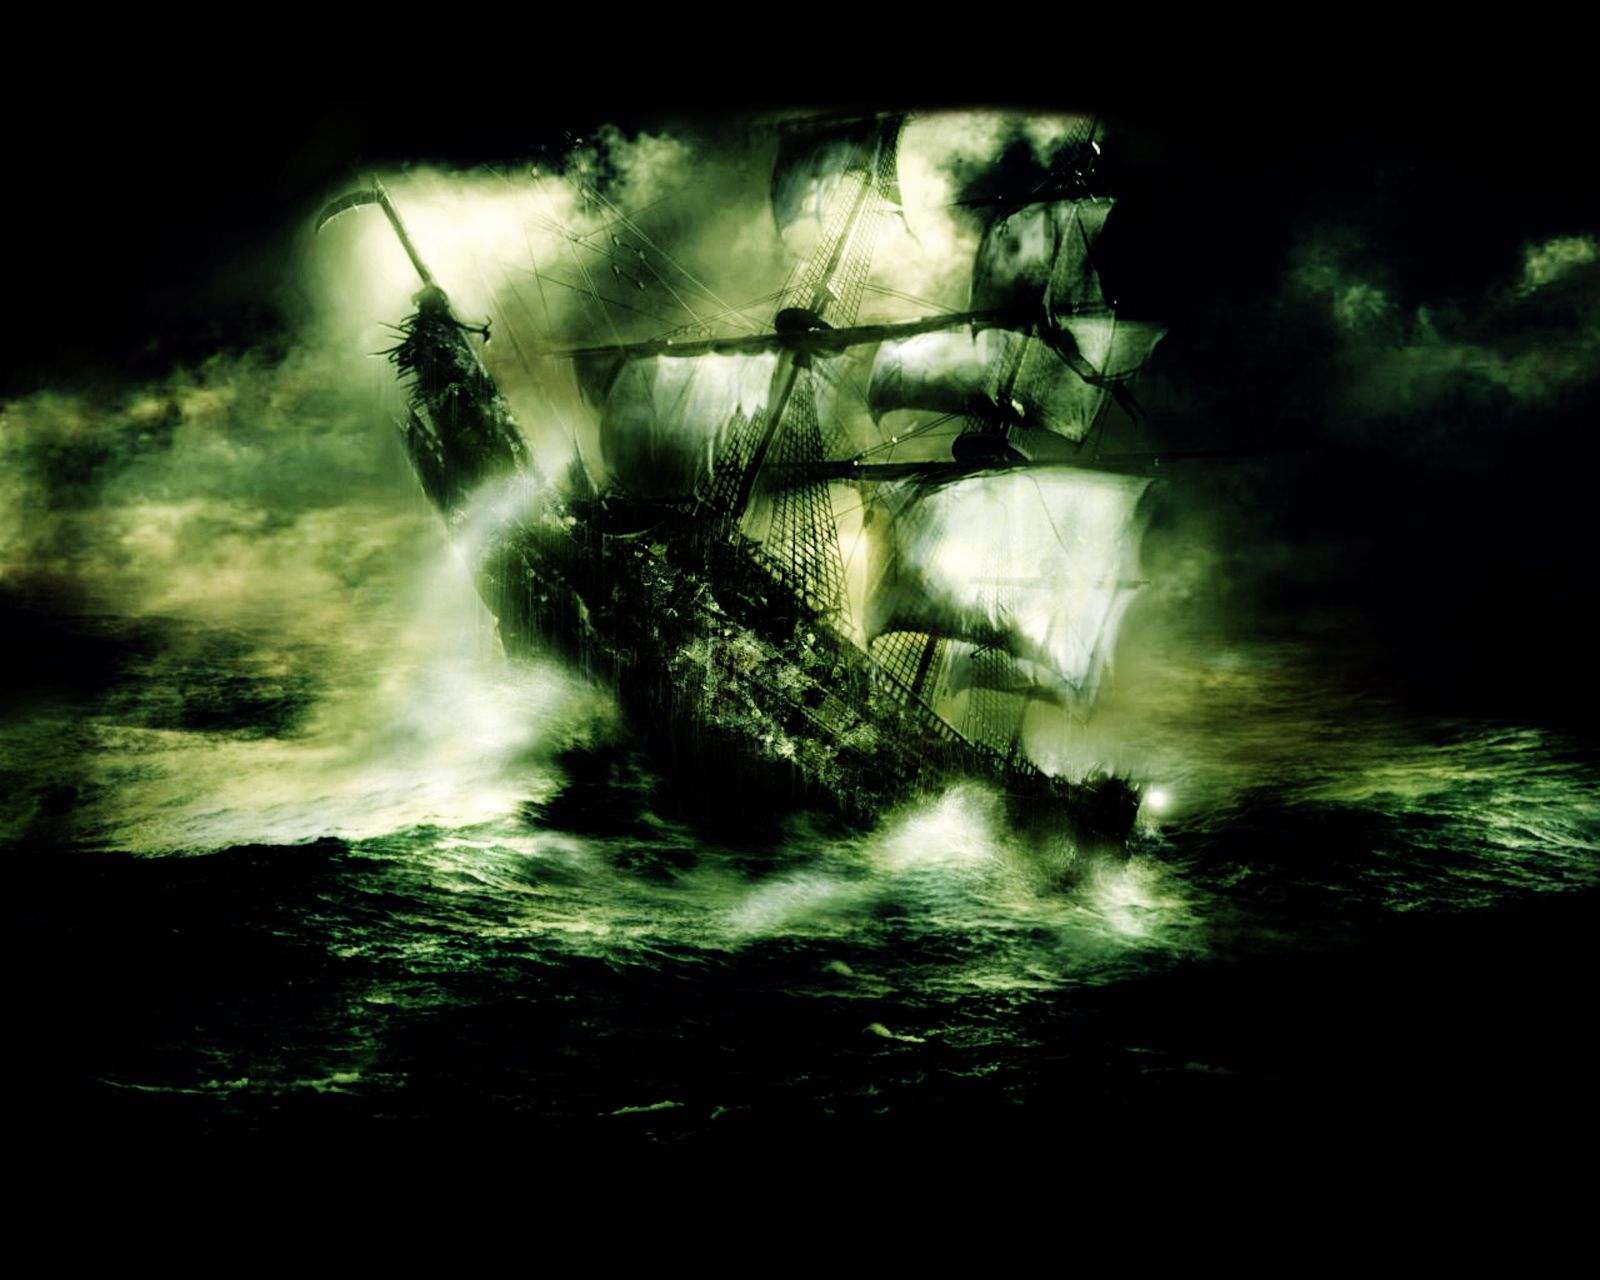 A ship sailing in the middle of the ocean - Pirate